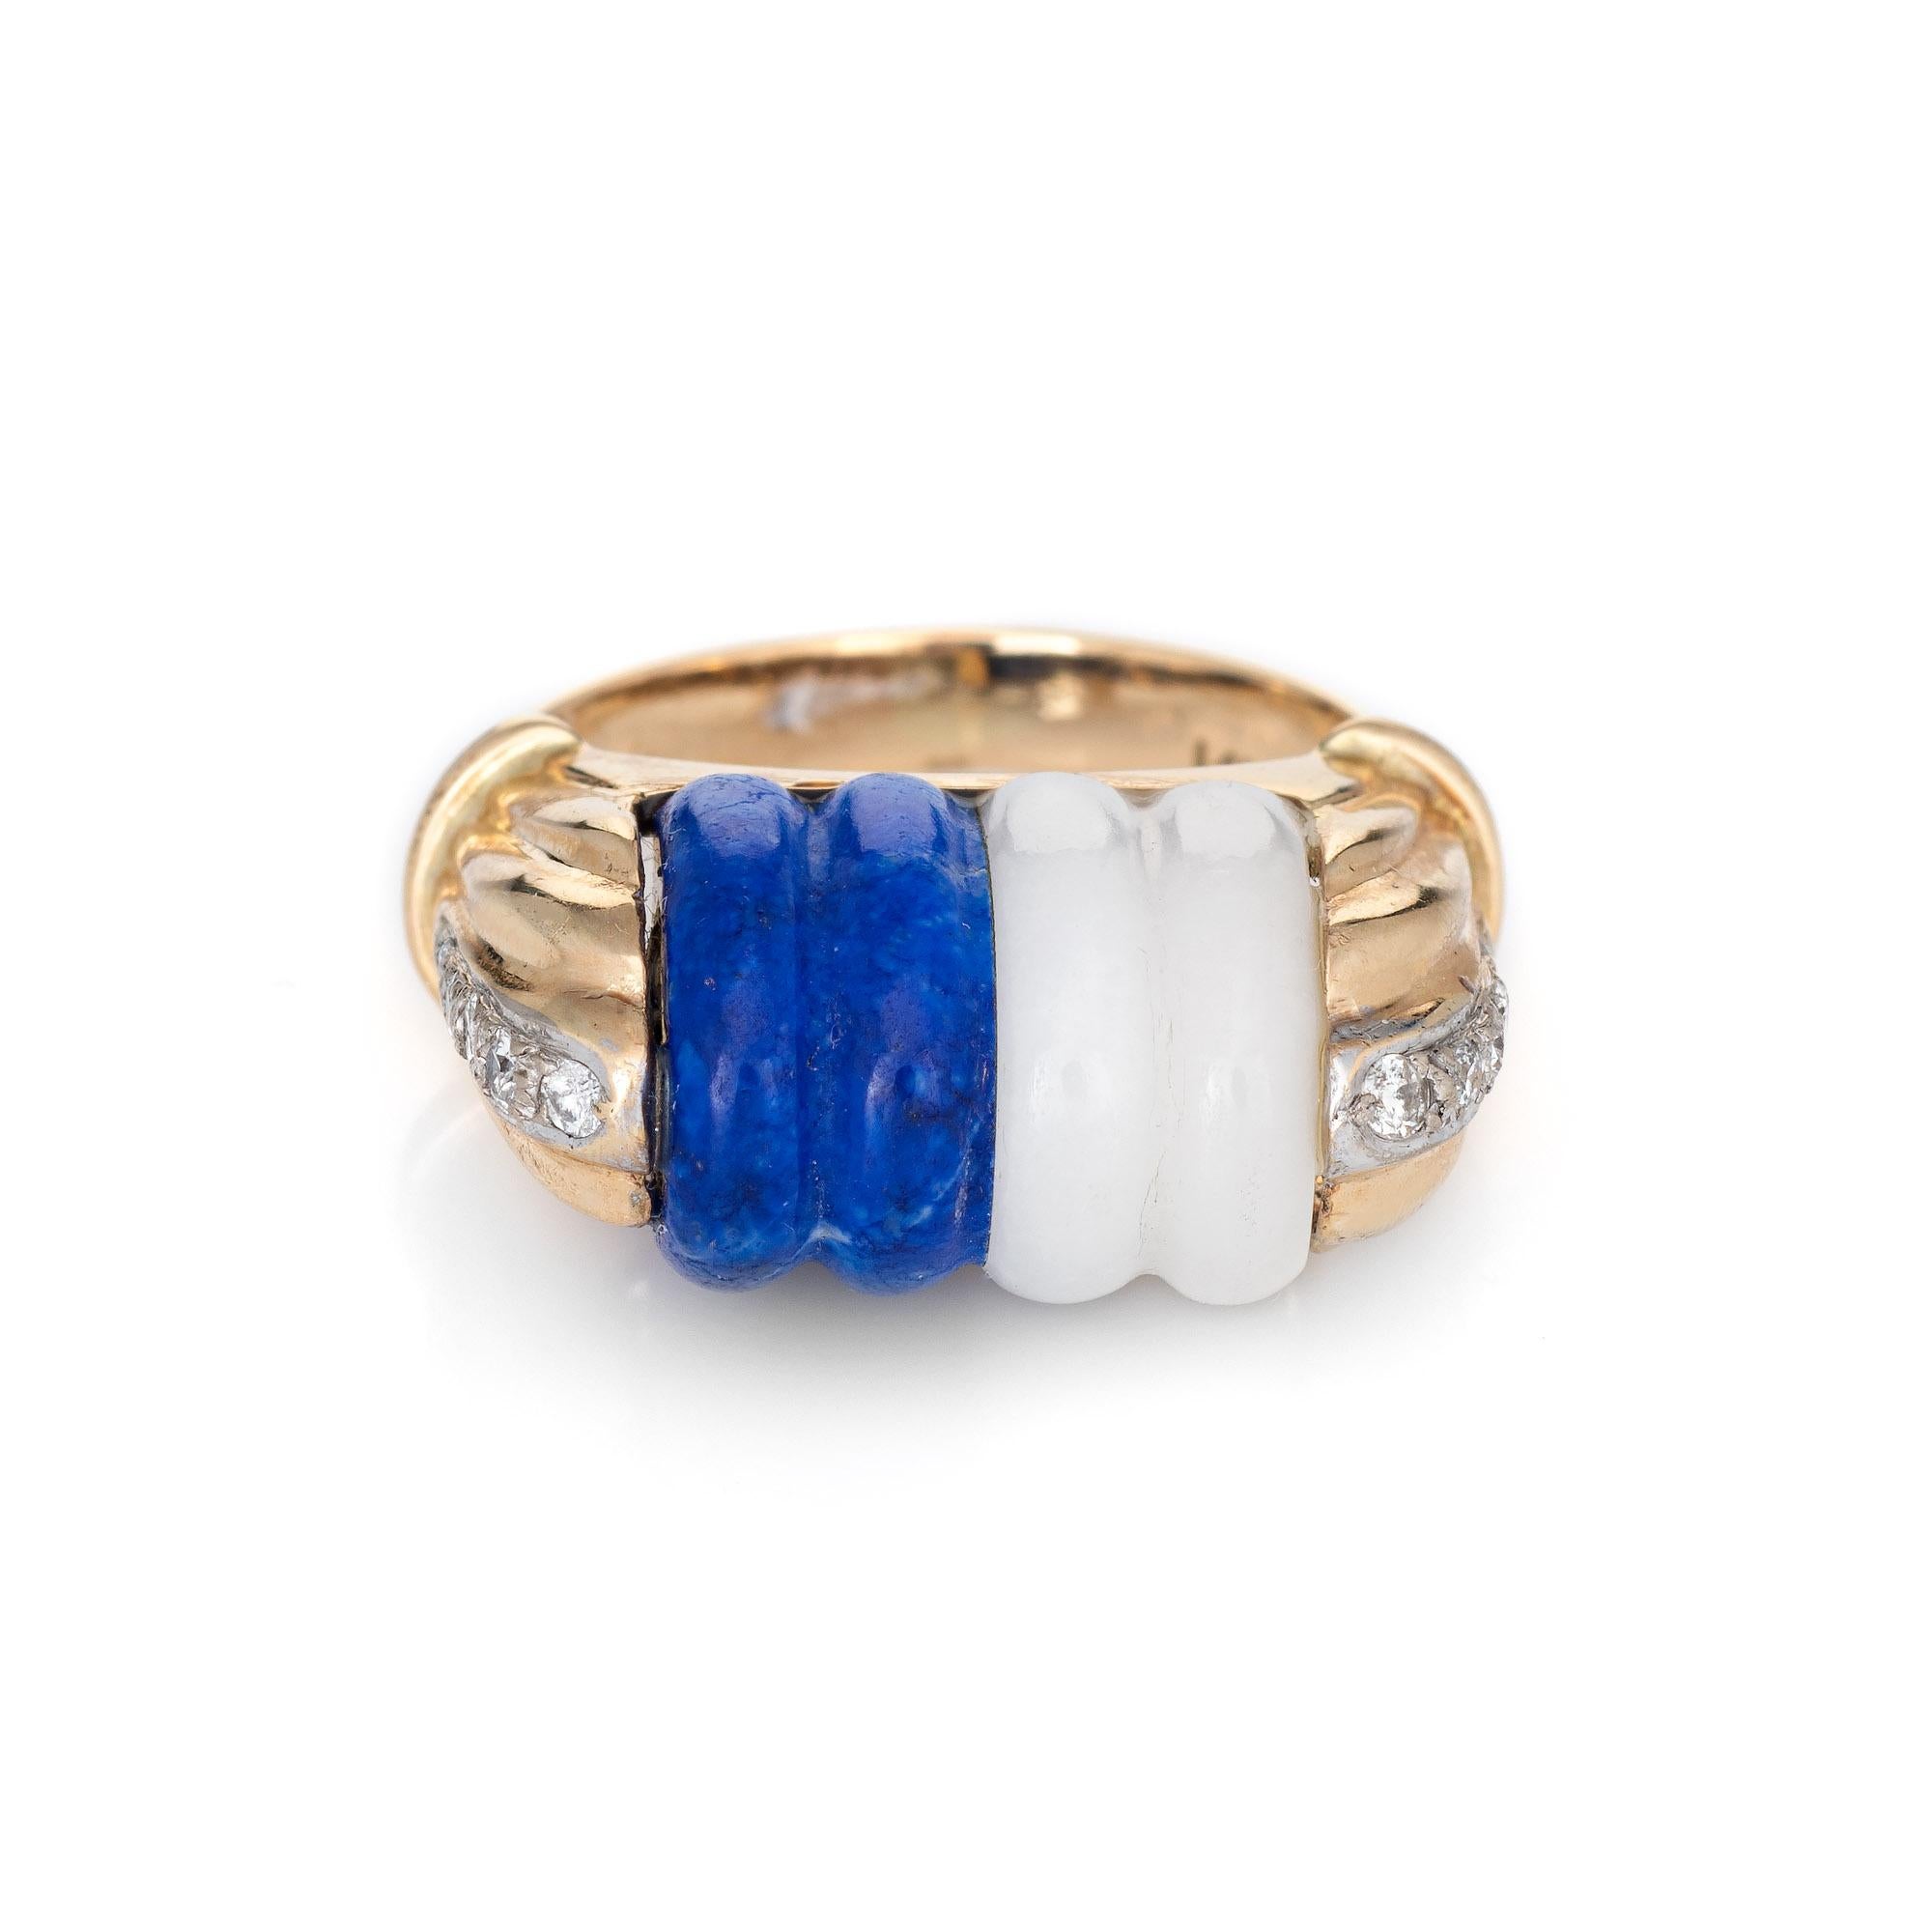 Finely detailed mid century vintage cocktail ring (circa 1950s to 1960s), crafted in 14 karat yellow gold. 

Fluted sodalite and white agate measures 12mm x 10mm. The diamonds total an estimated 0.15 carats (estimated at I color and SI2 clarity).